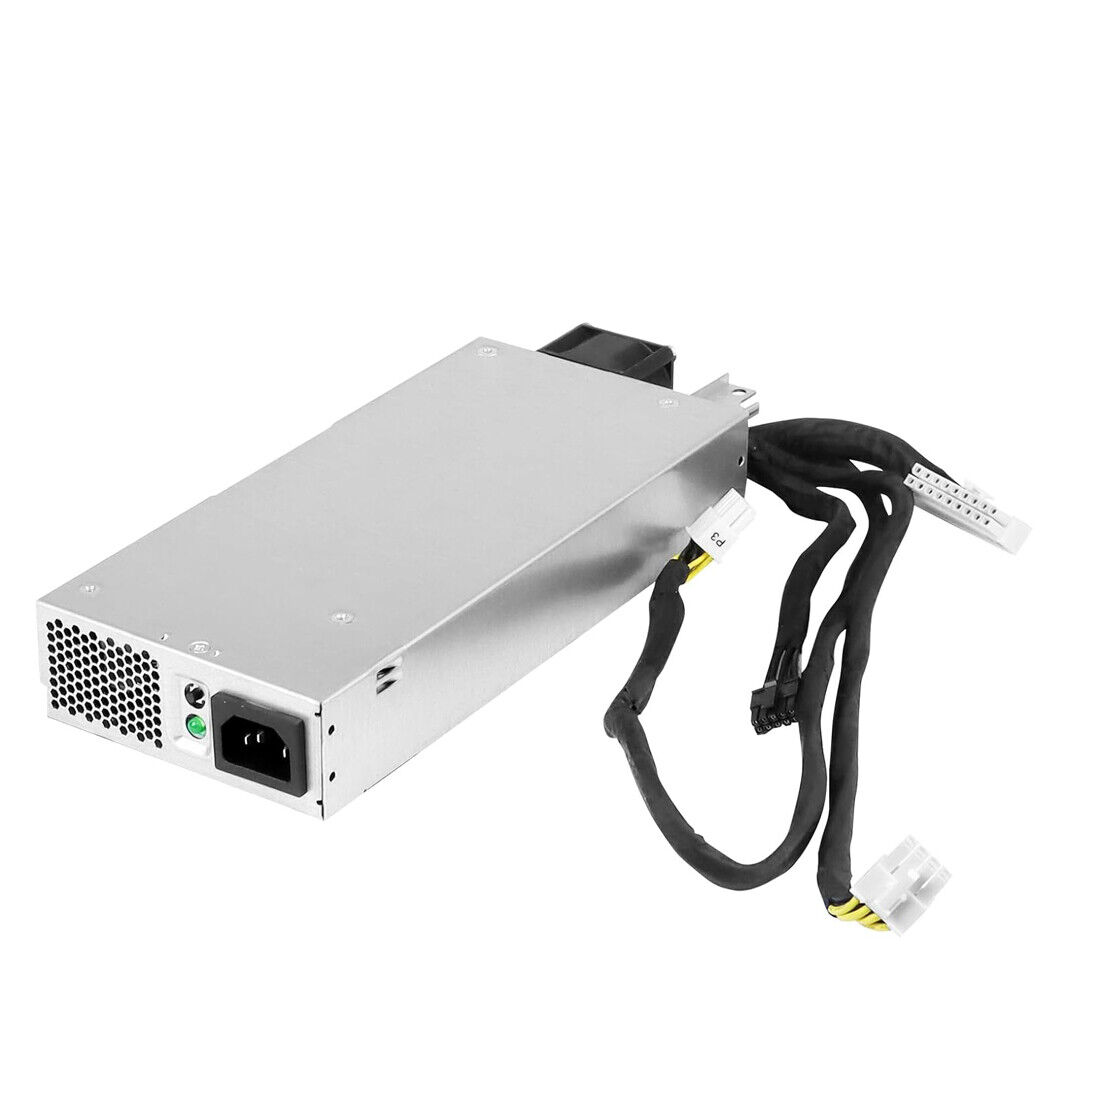 New 450W Power Supply AC450E-S1 T7MF2 For DELL PowerEdge R430 R440 R530 R540 US